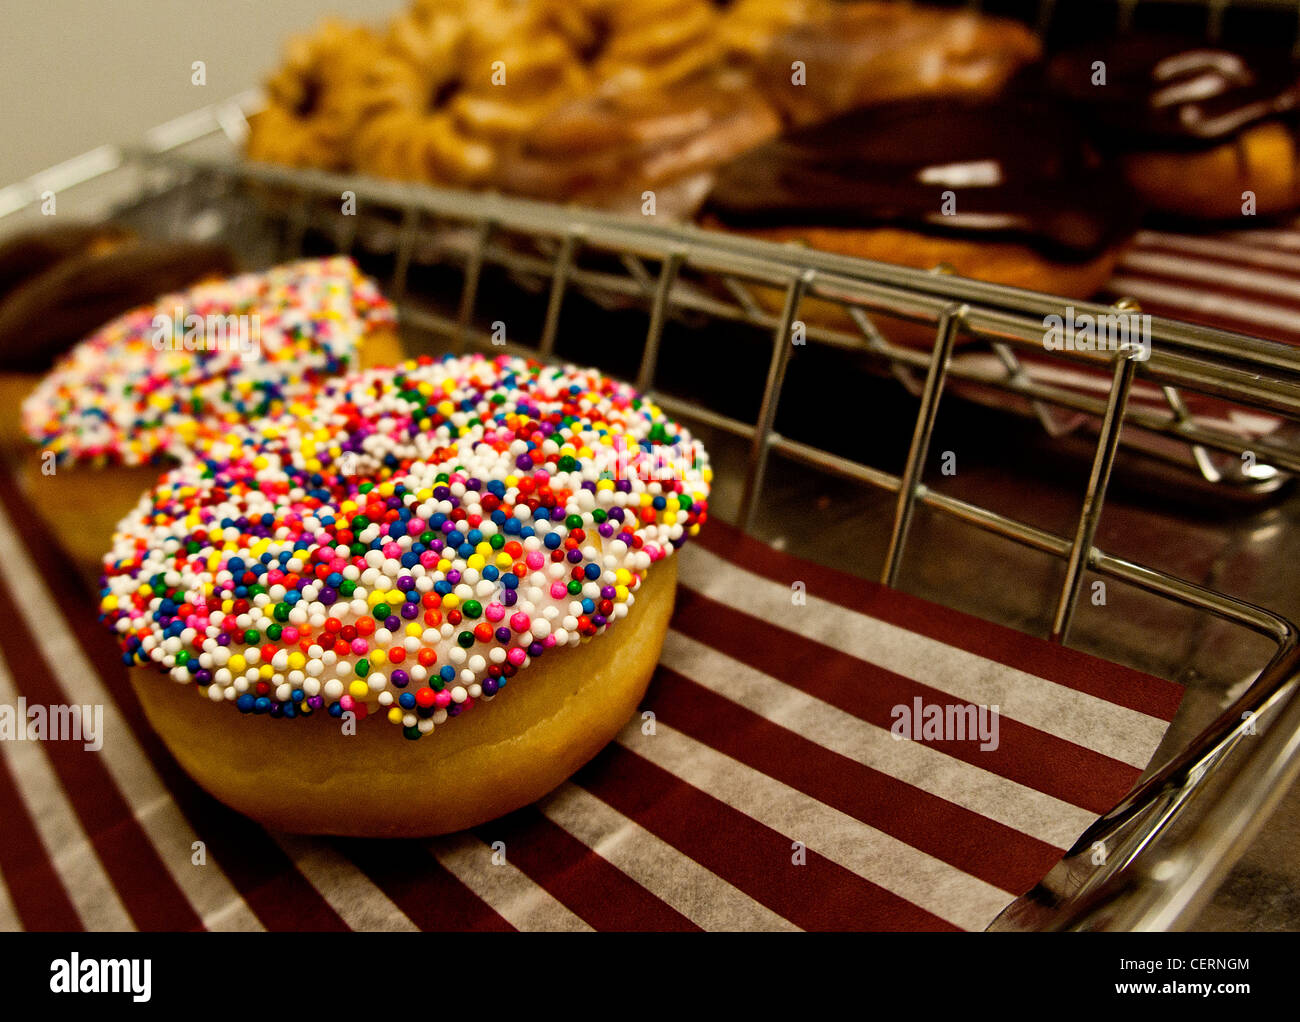 A tray of donuts Stock Photo